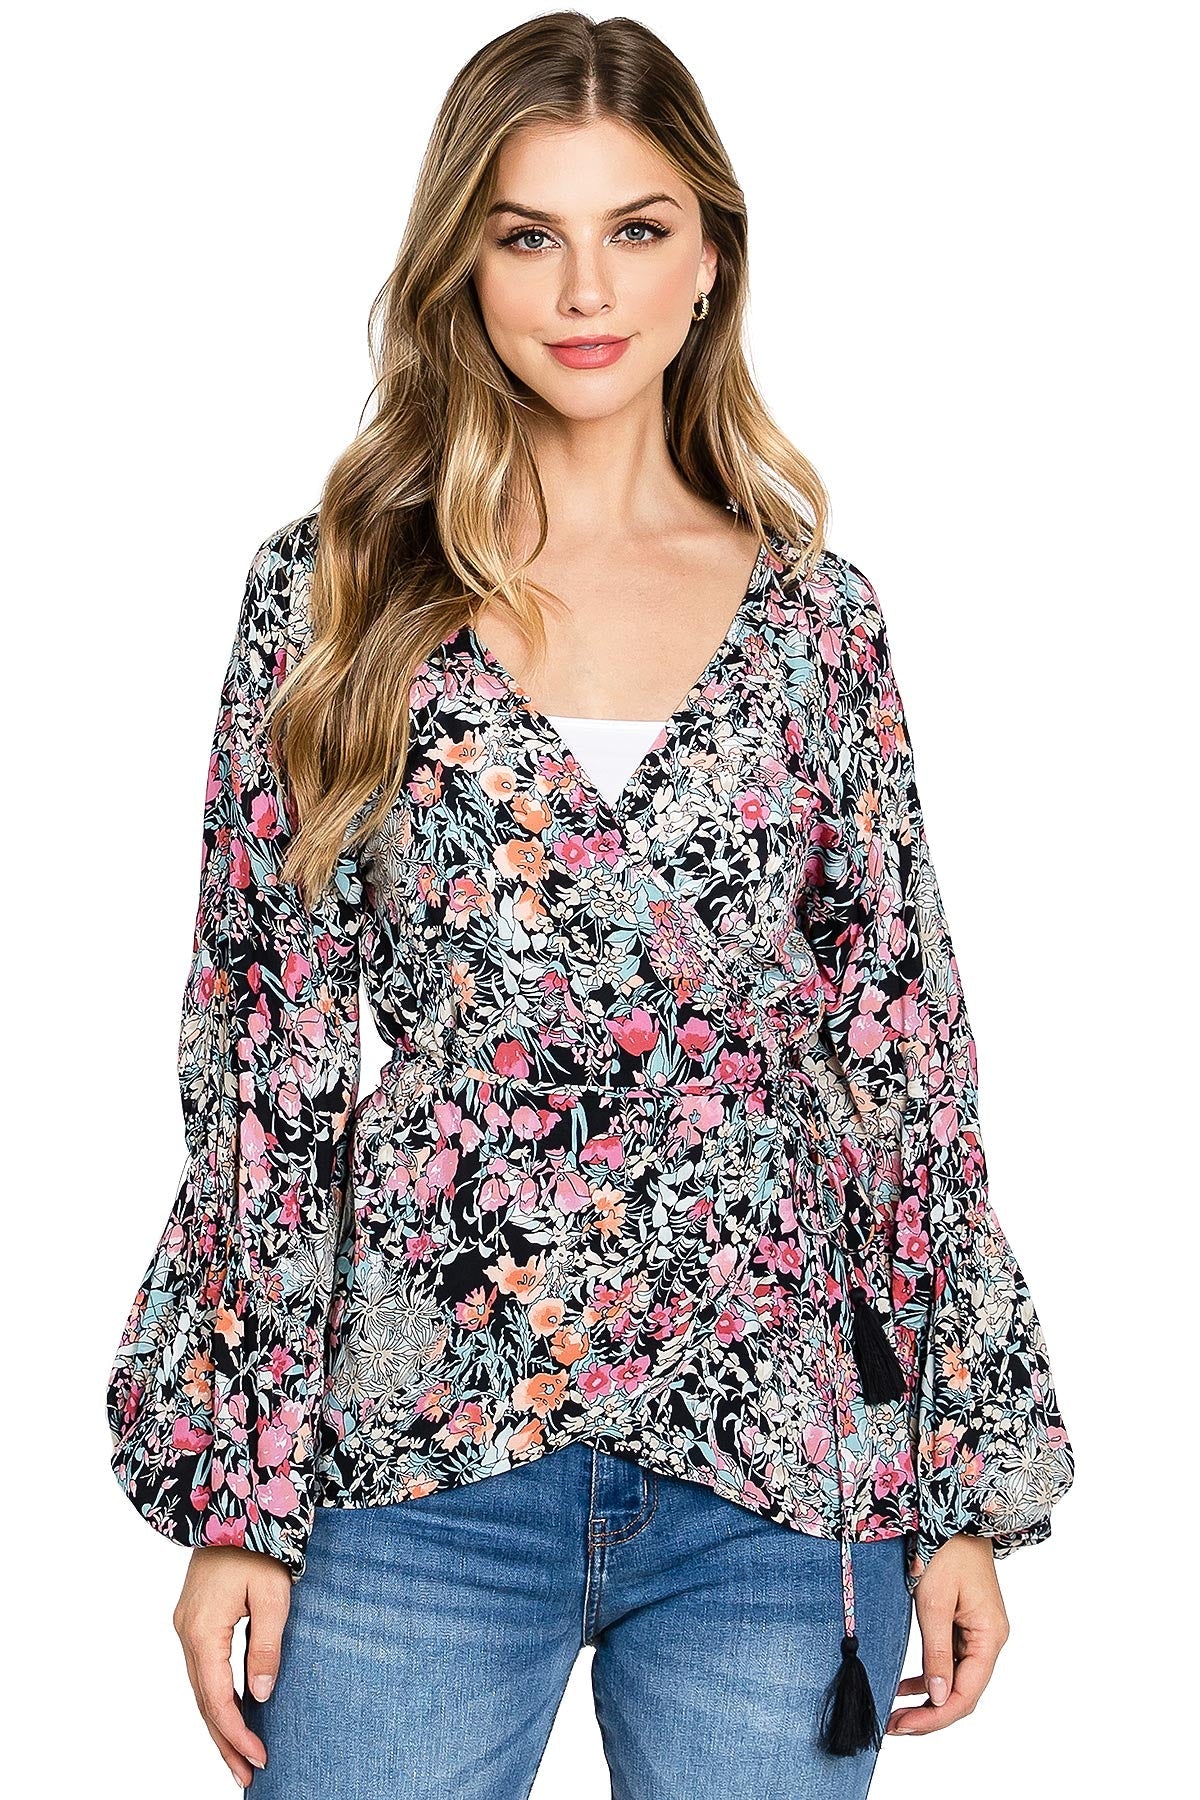 Neo Floral Blouse